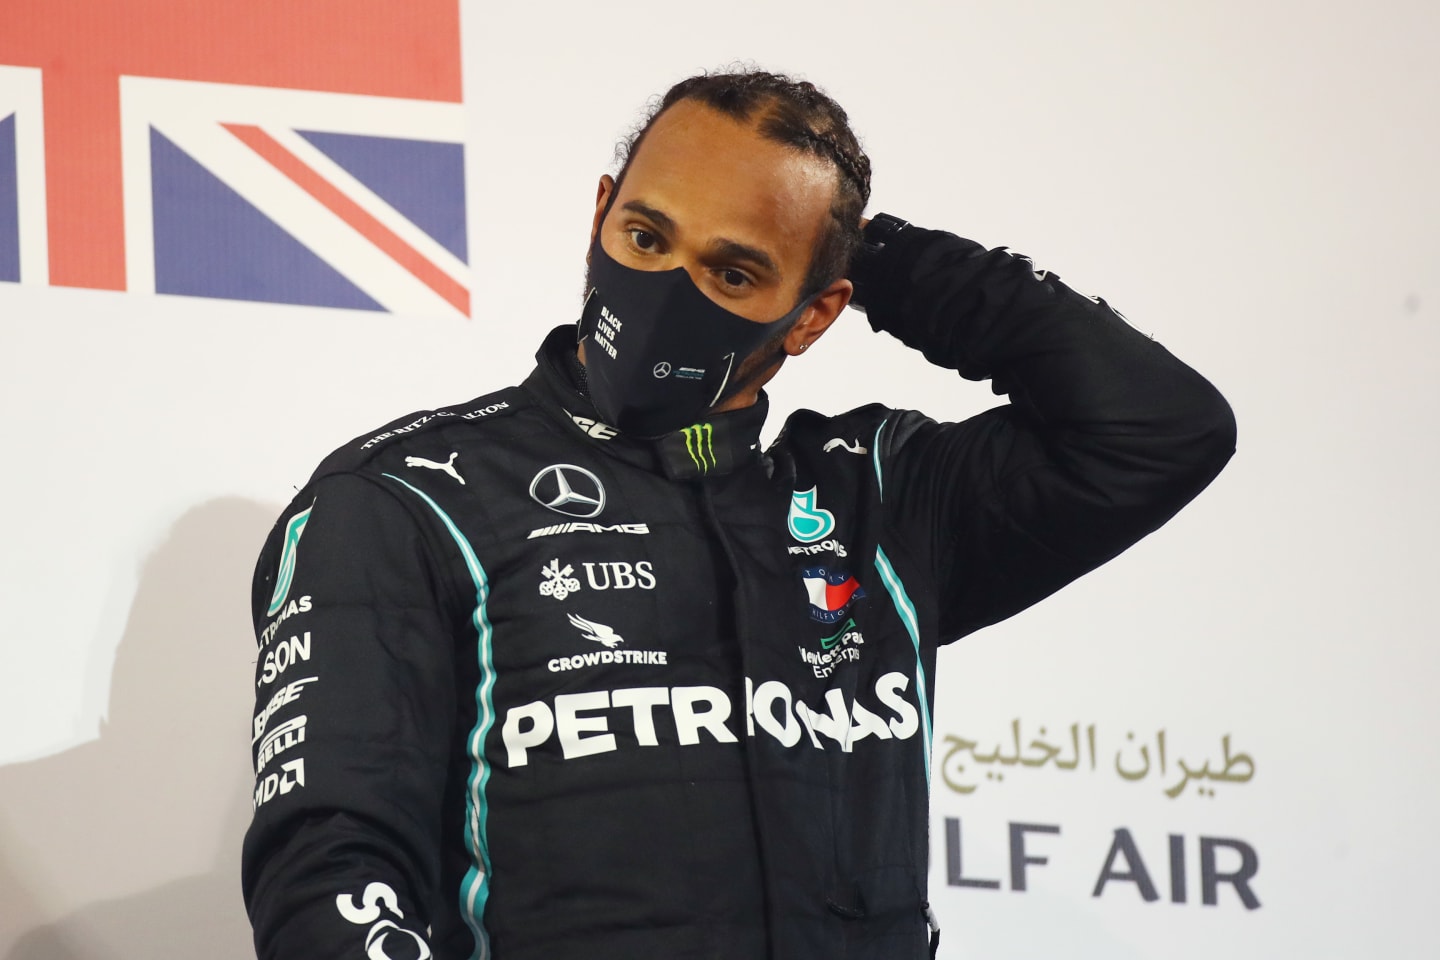 BAHRAIN, BAHRAIN - NOVEMBER 29: Race winner Lewis Hamilton of Great Britain and Mercedes GP celebrates on the podium during the F1 Grand Prix of Bahrain at Bahrain International Circuit on November 29, 2020 in Bahrain, Bahrain. (Photo by Bryn Lennon/Getty Images)